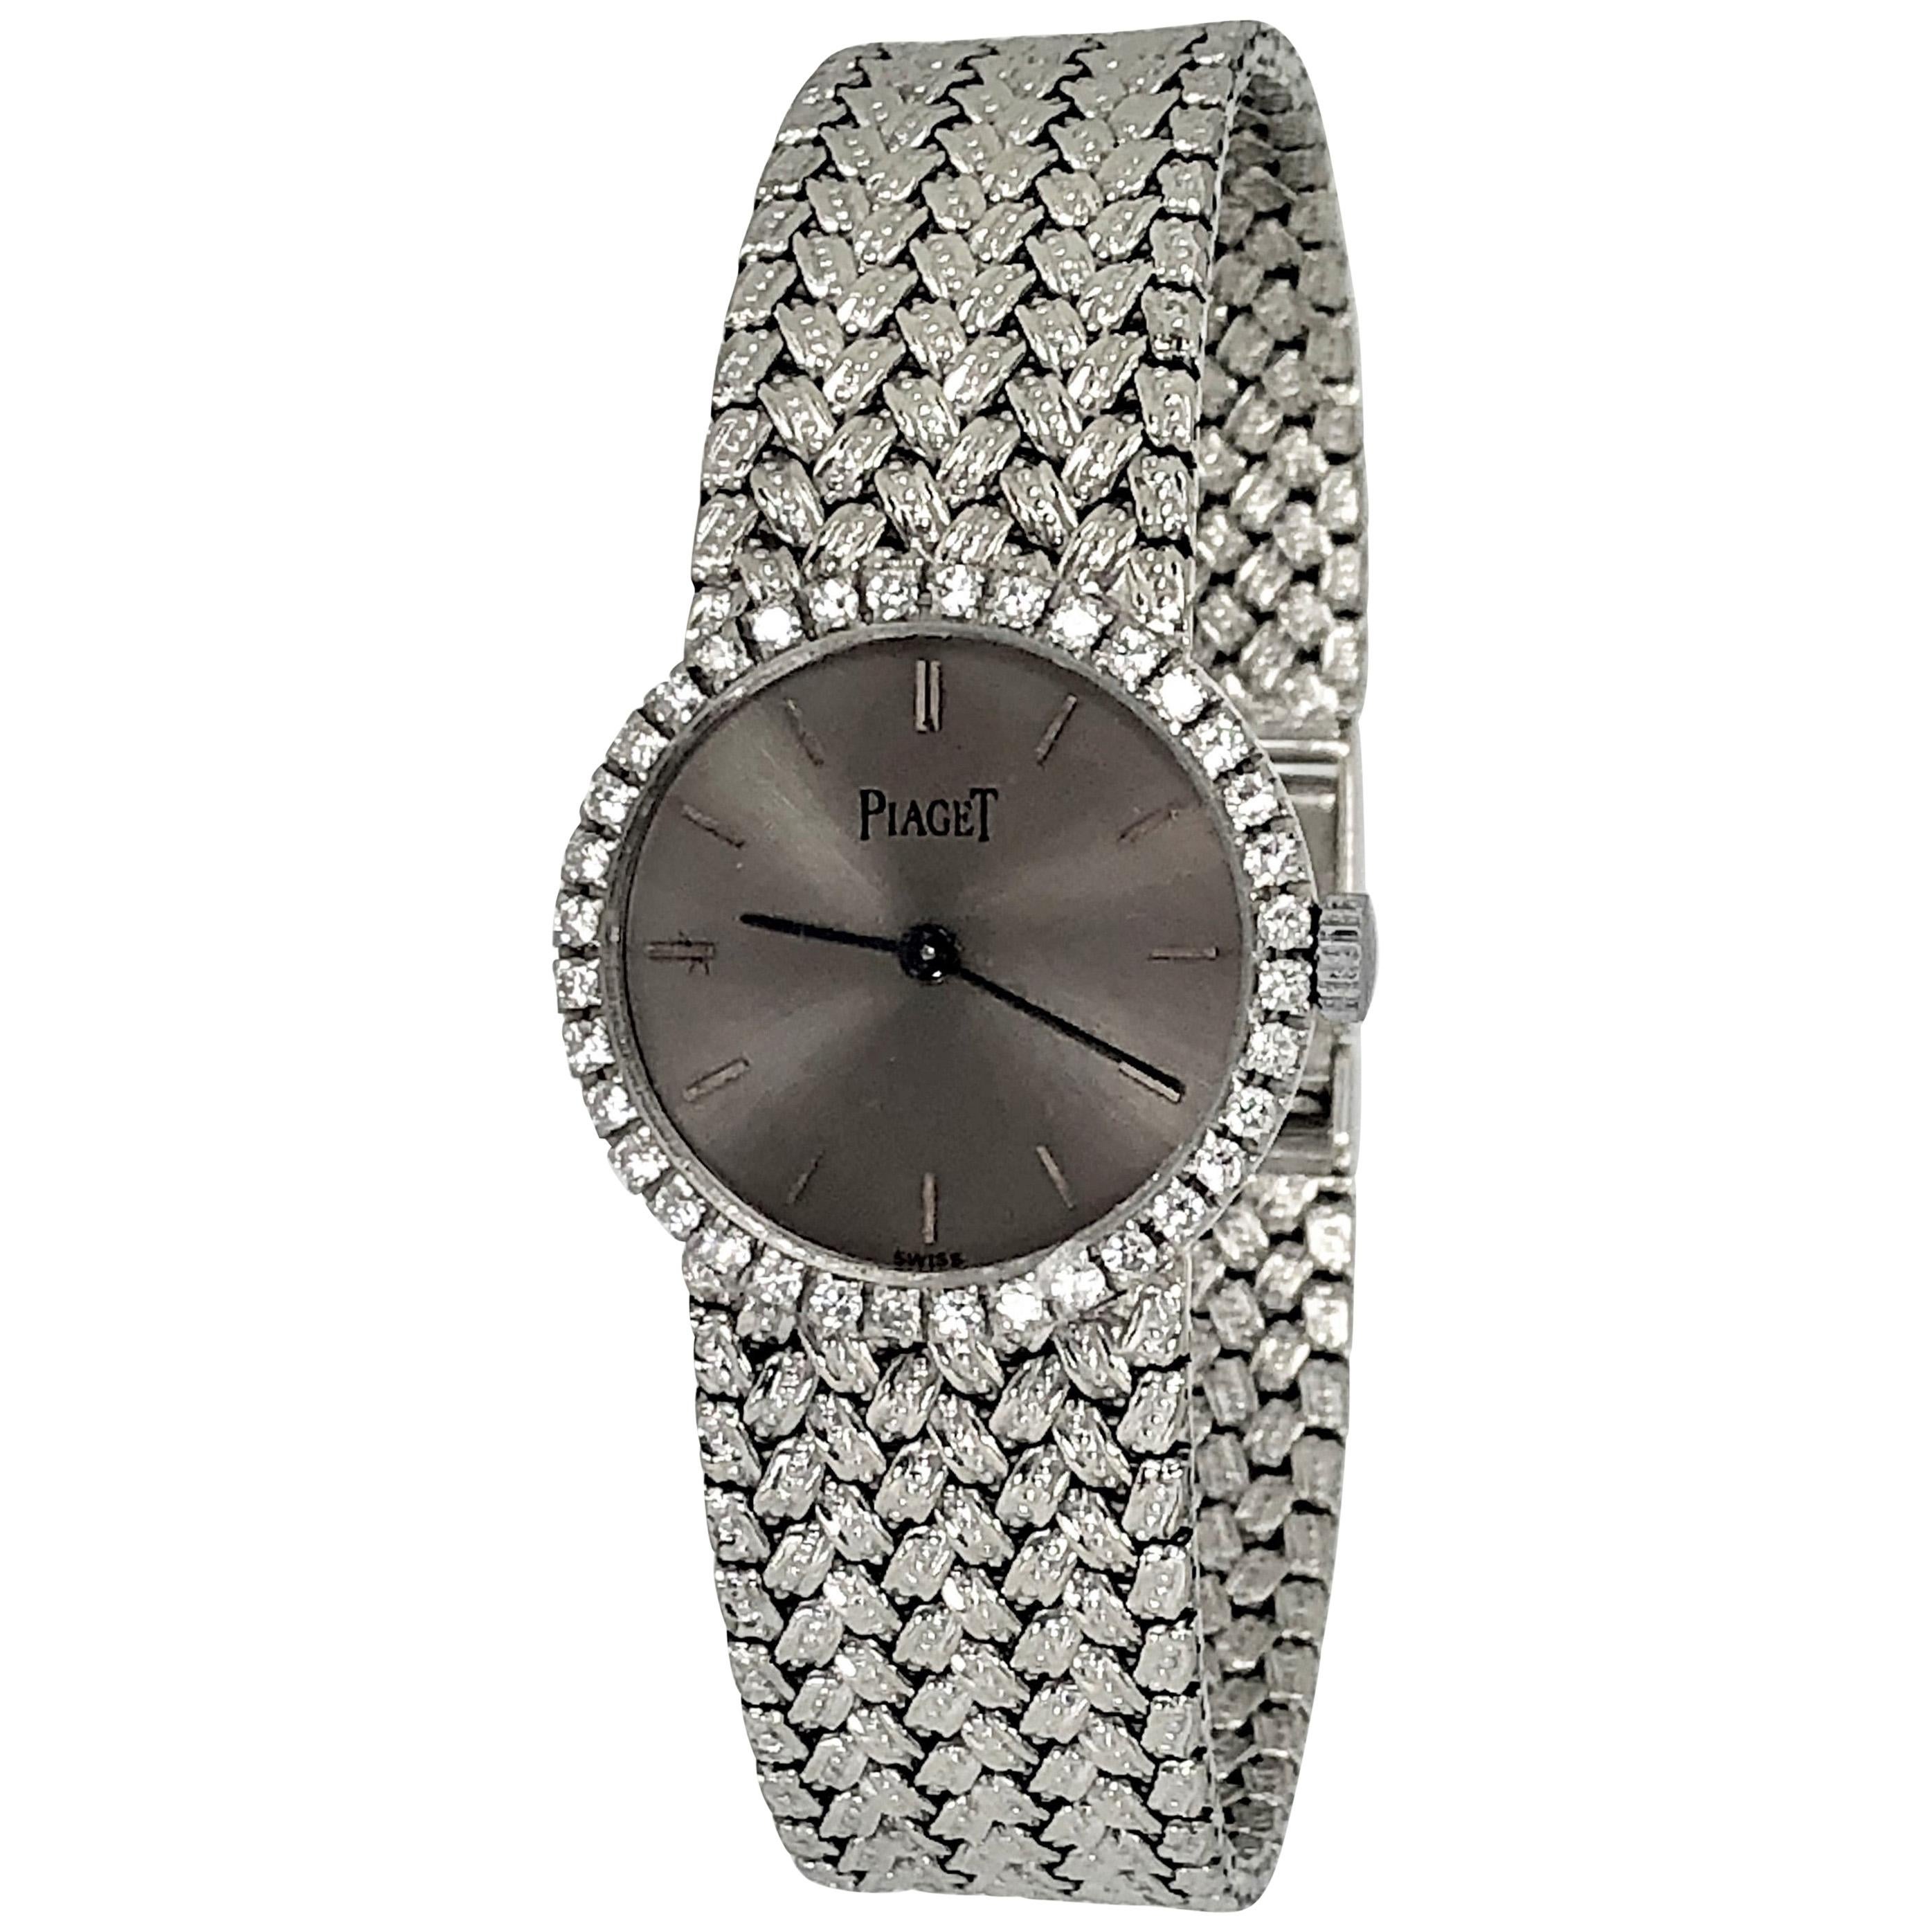 Ladies Piaget Watch with Slate Grey Dial, Diamond Bezel and Unique Braided Band